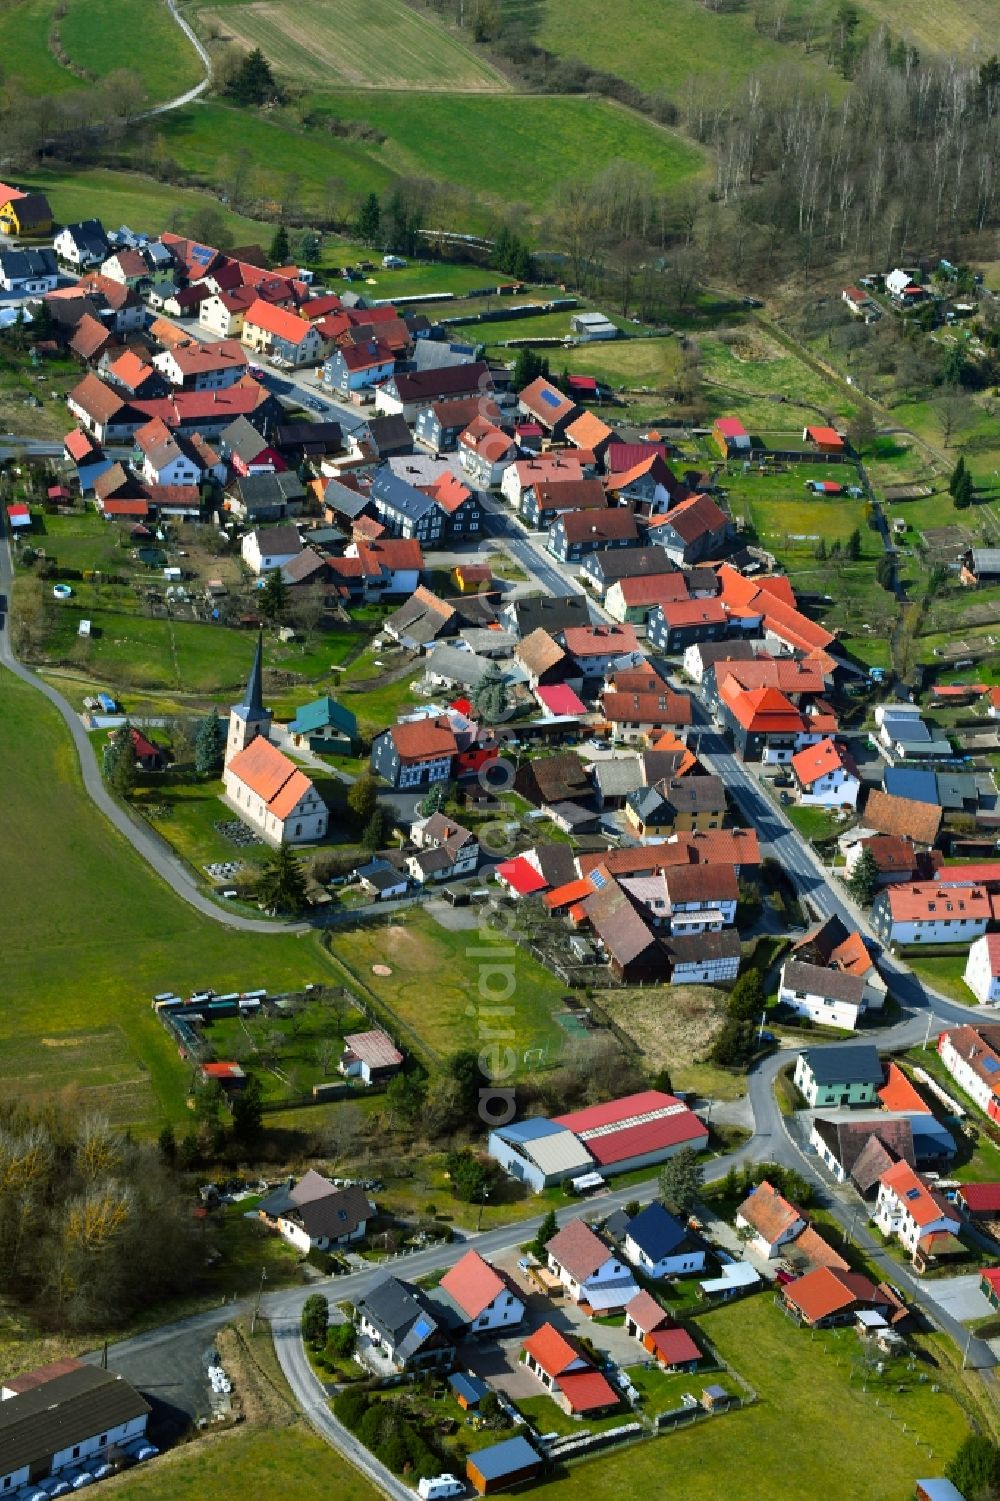 Wiedersbach from above - Village view on the edge of forest areas in a foothill landscape of the district Wiedersbach in Auengrund in the state Thuringia, Germany